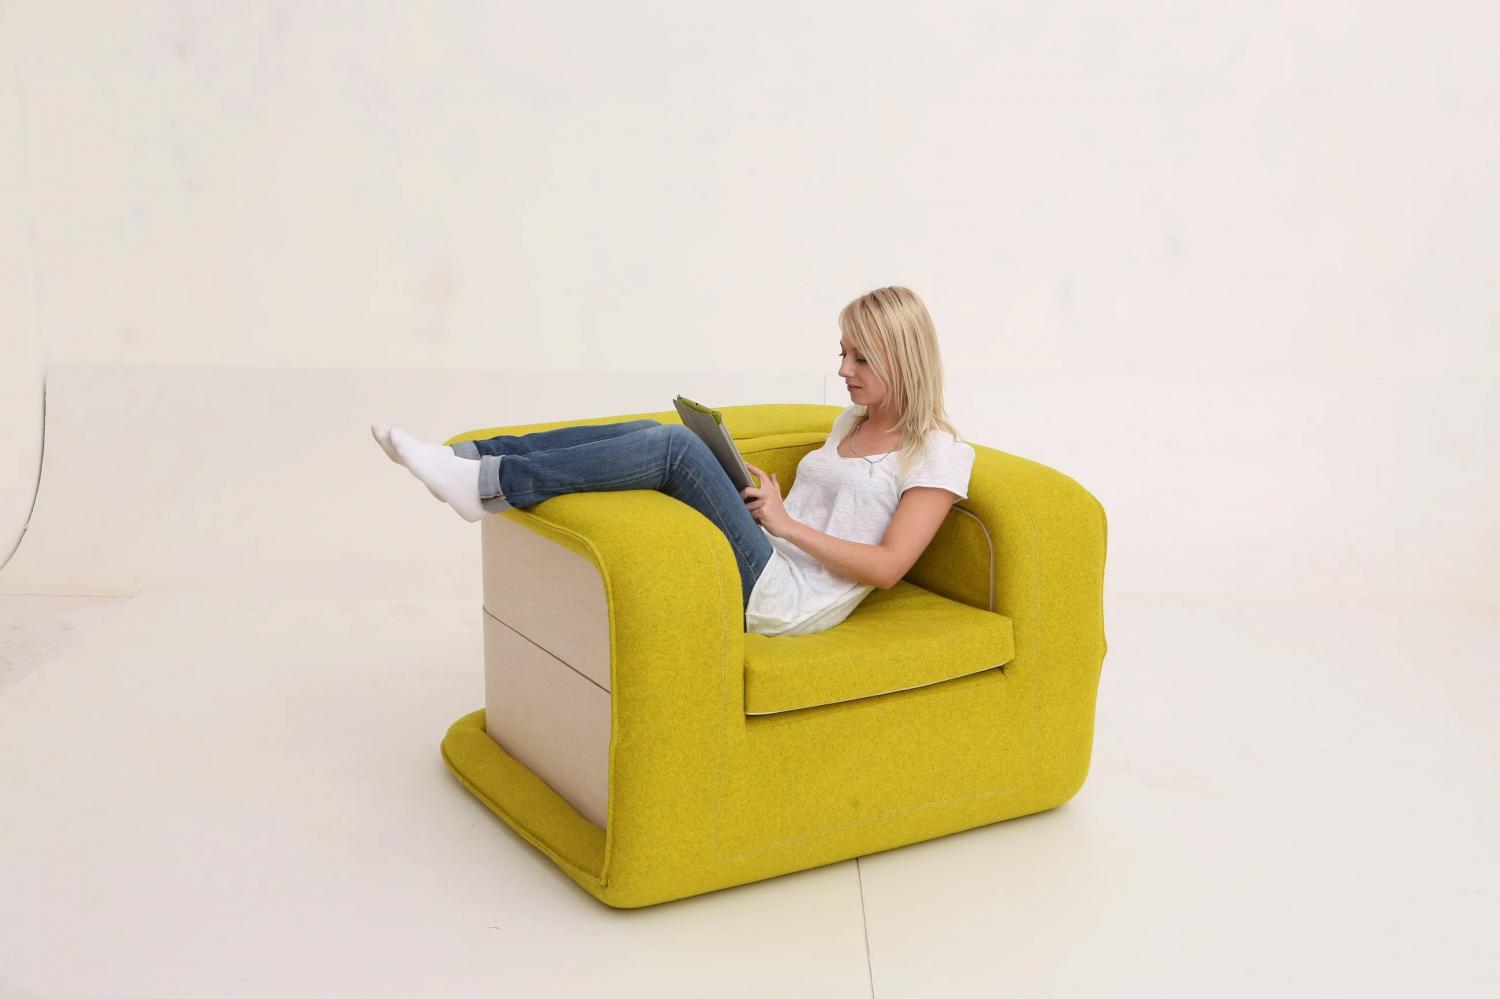 FLOP Multi-functional Arm Chair Instantly Turns Into a Bed - Folding chair bed opens like a book